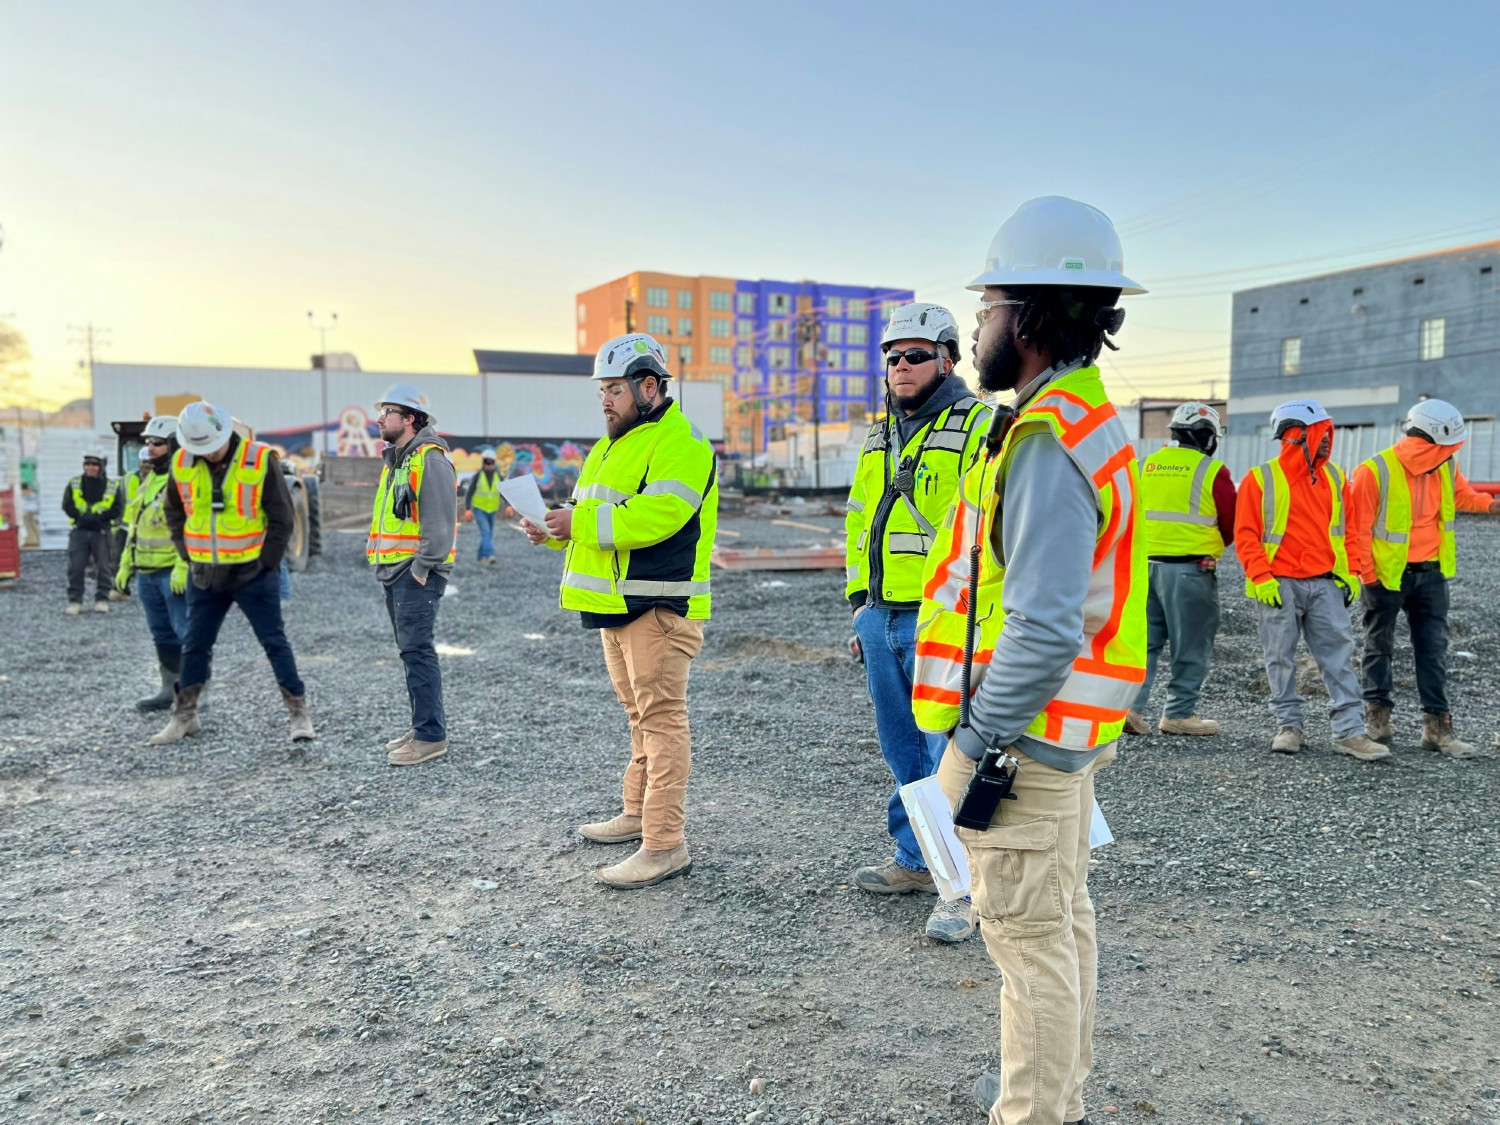 Our Safety team leading a safety stand-down on-site. 